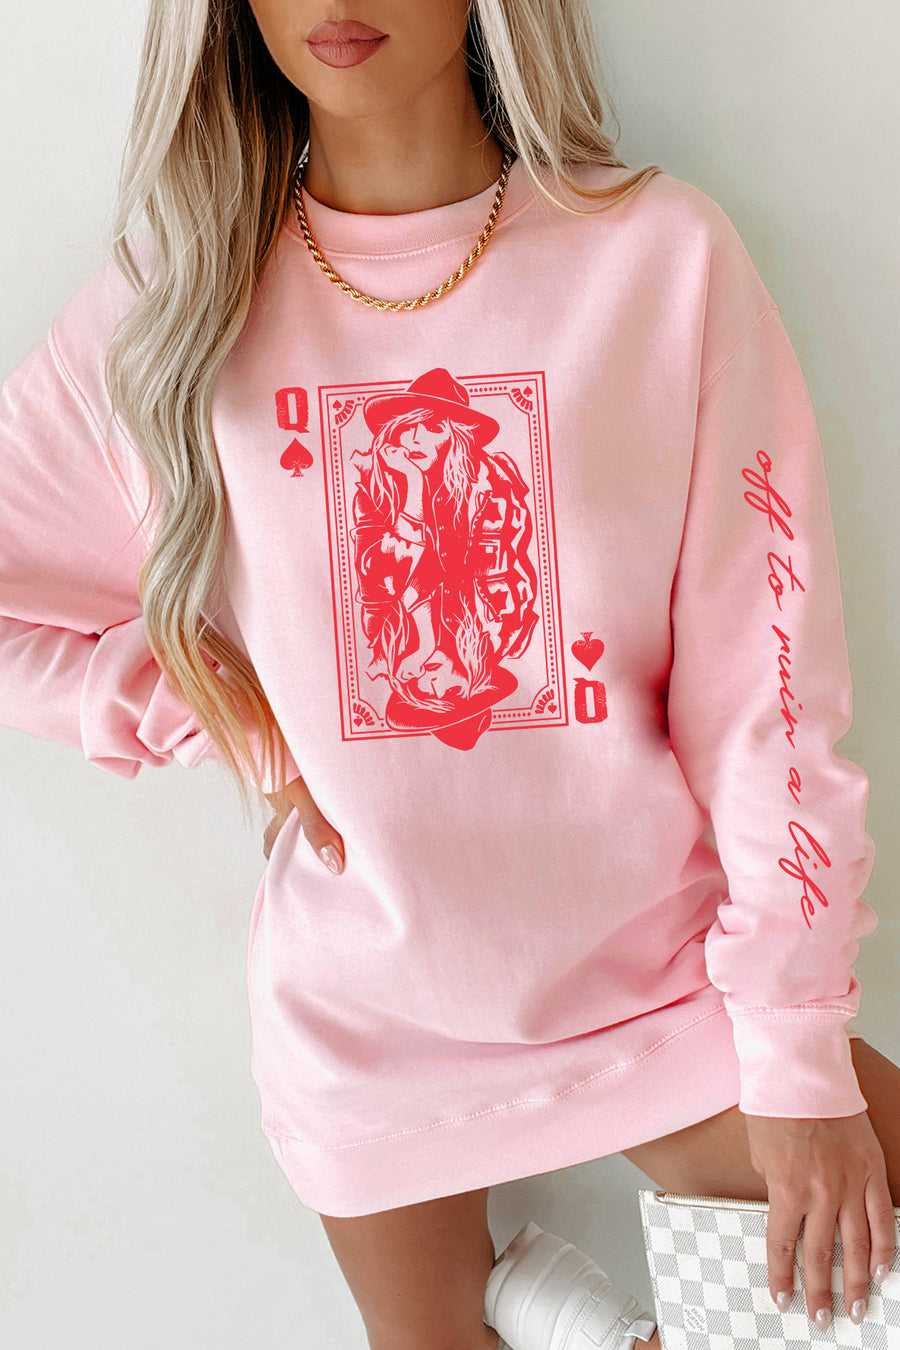 "Off To Ruin A Life" Double-Sided Graphic Crewneck (Light Pink) - Print On Demand - NanaMacs